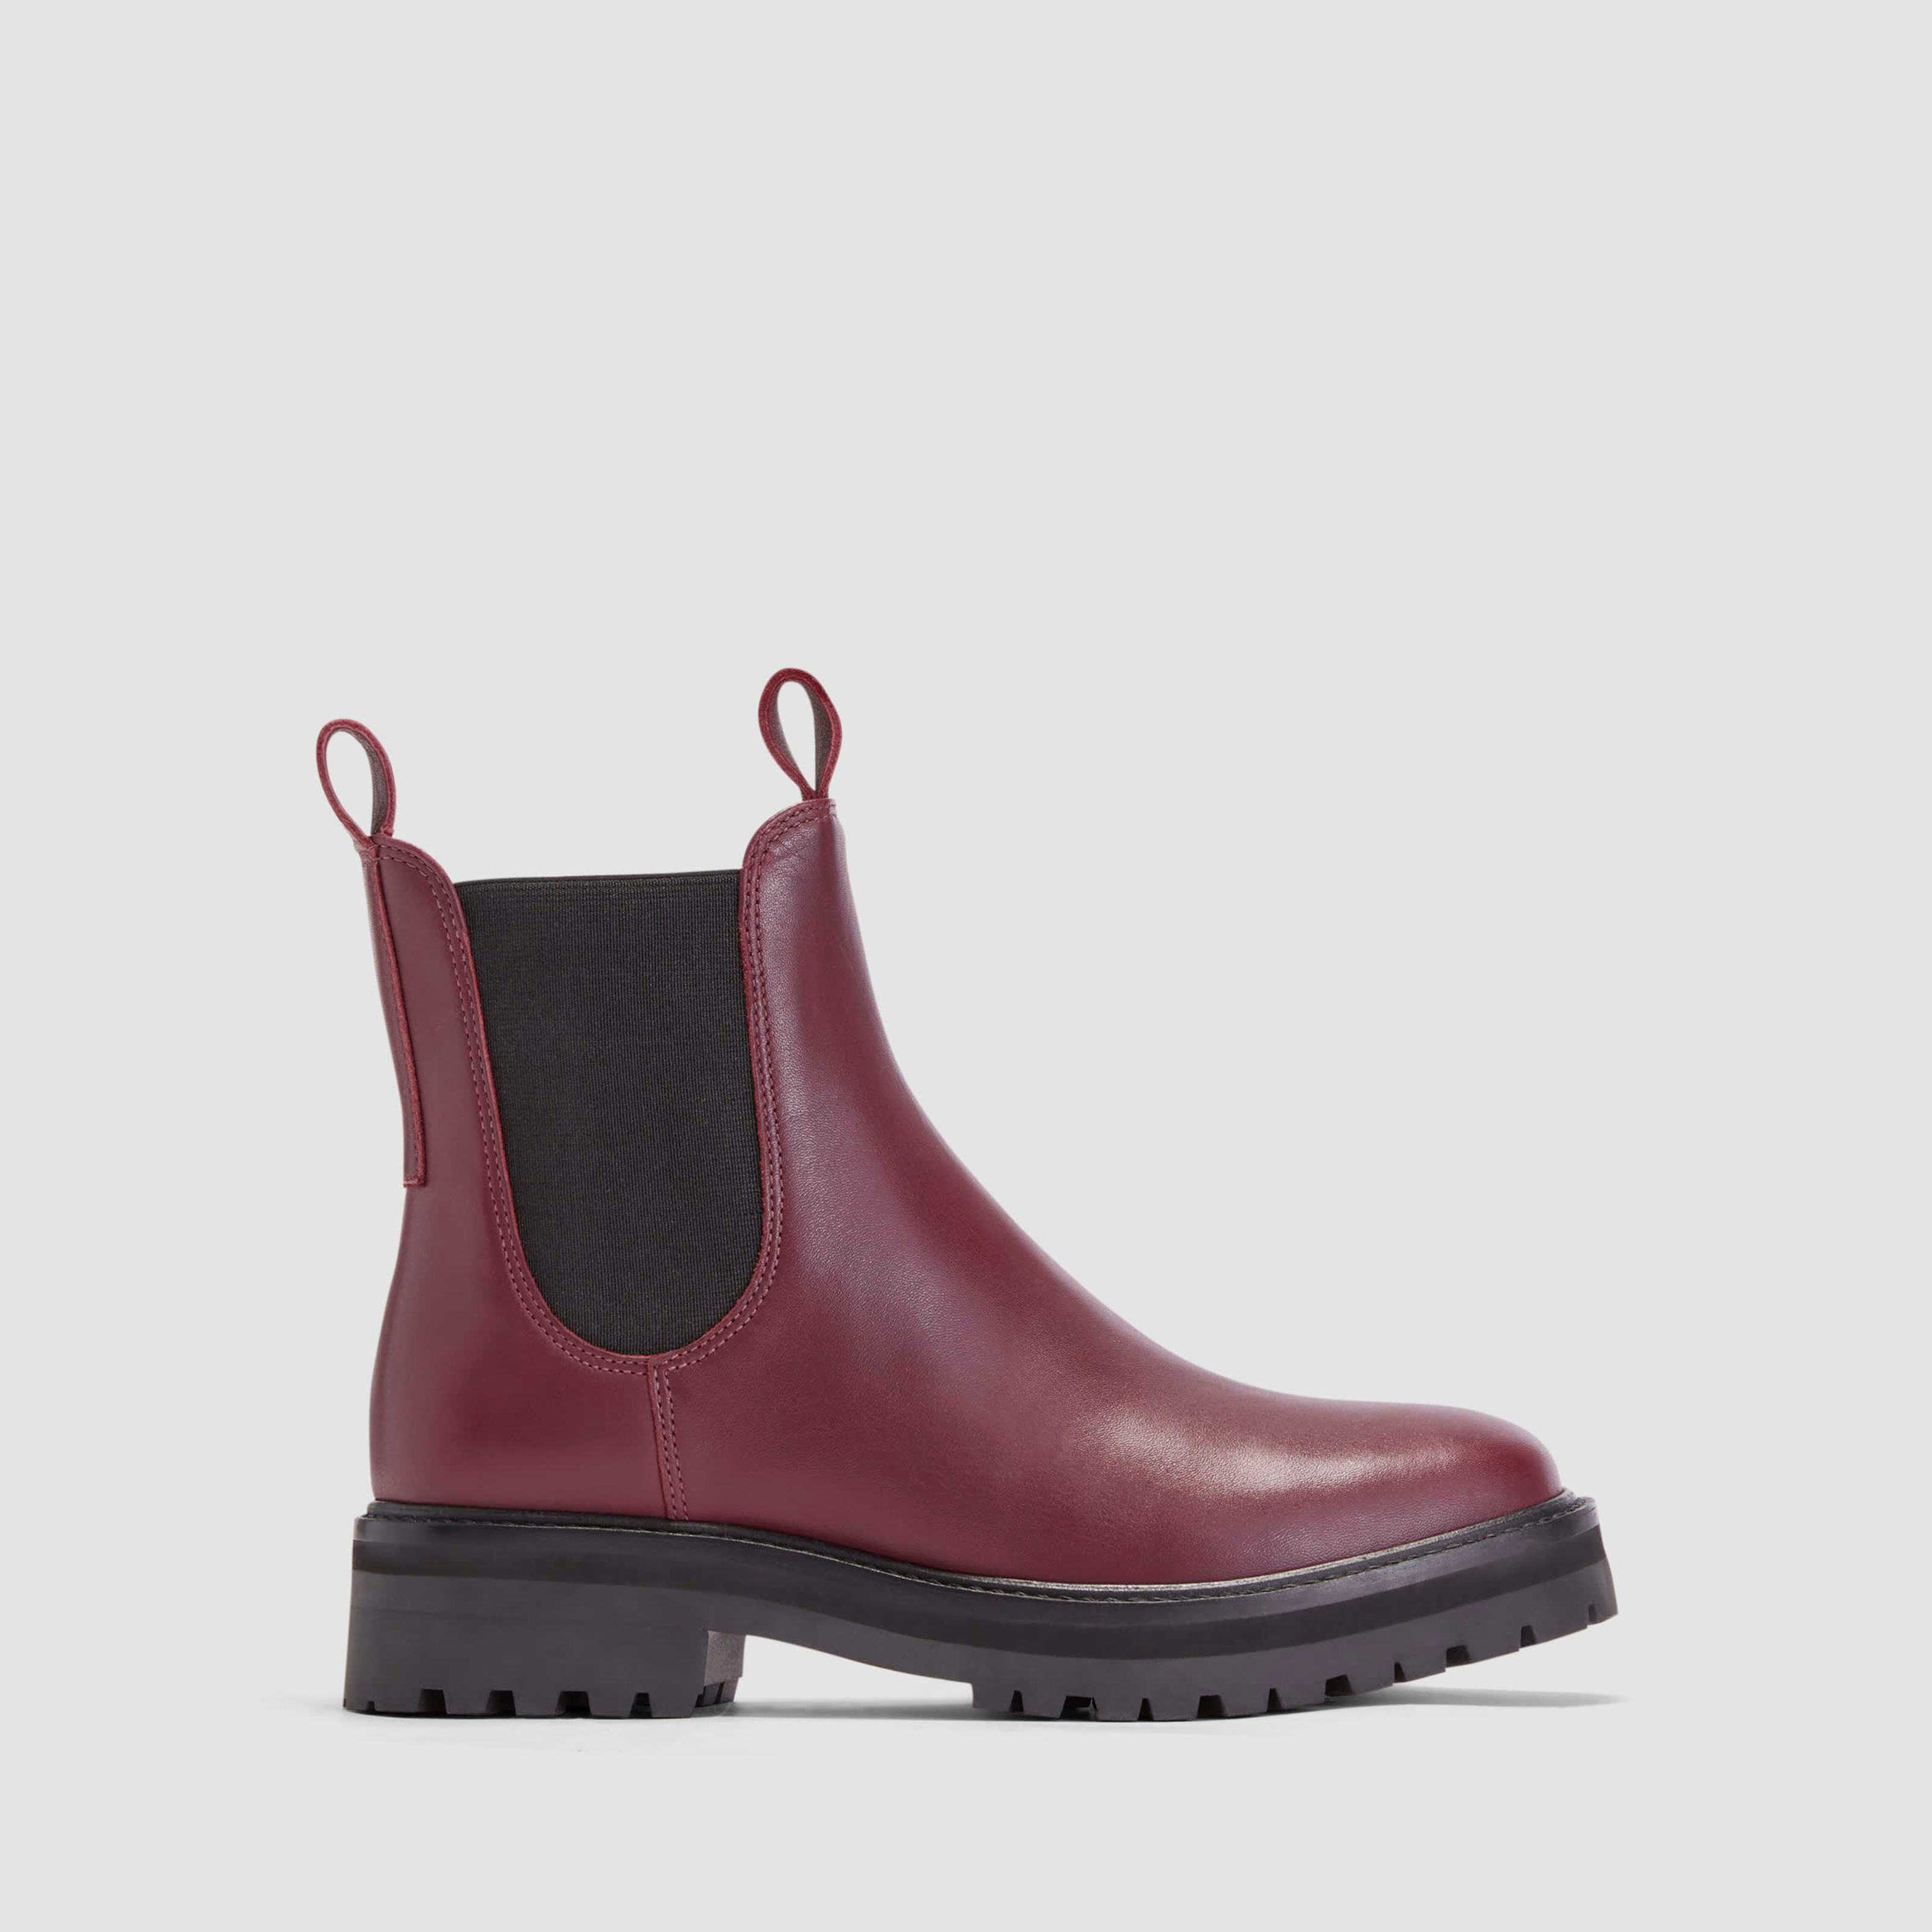 Lug Chelsea Boot by Everlane in Bordeaux, Size 5